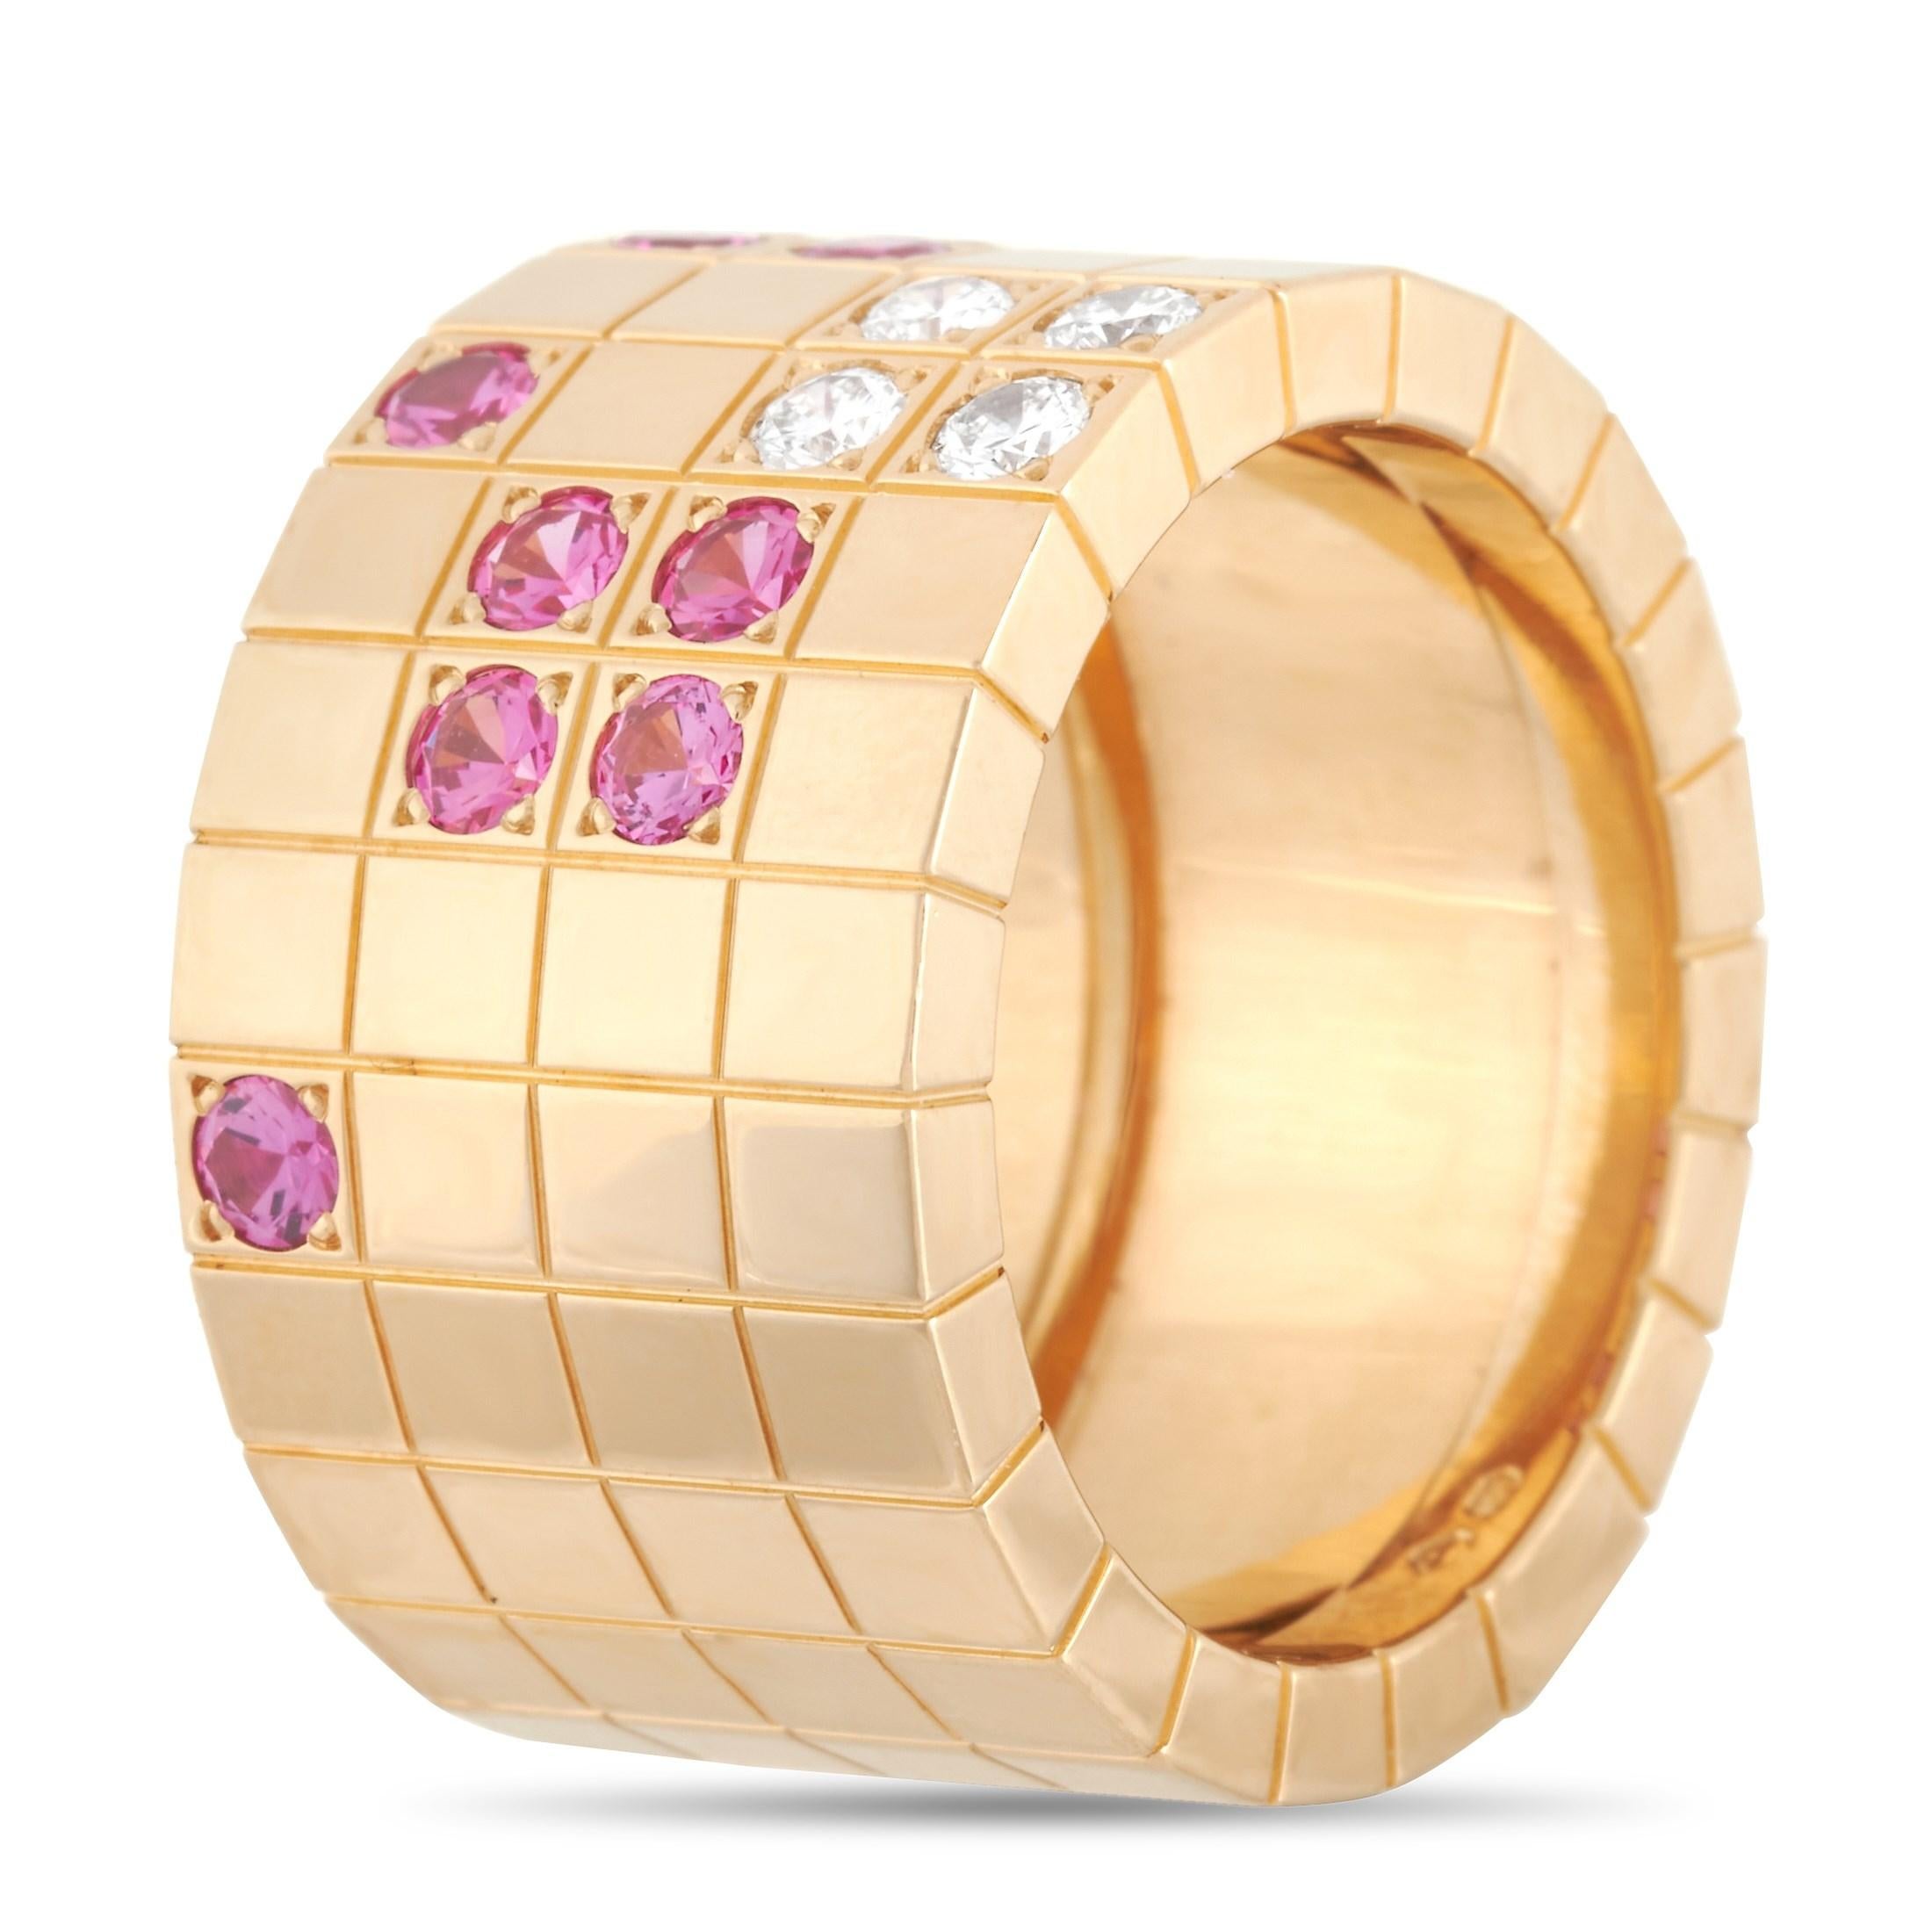 The Cartier 18K Rose Gold Lanieres Diamond and Pink Sapphire Wide Band Ring will grab some attention. Who wouldn't notice that puzzle-like assembly of diamonds and pink sapphires on a continuous sequence of square motifs? This fabulous ring with